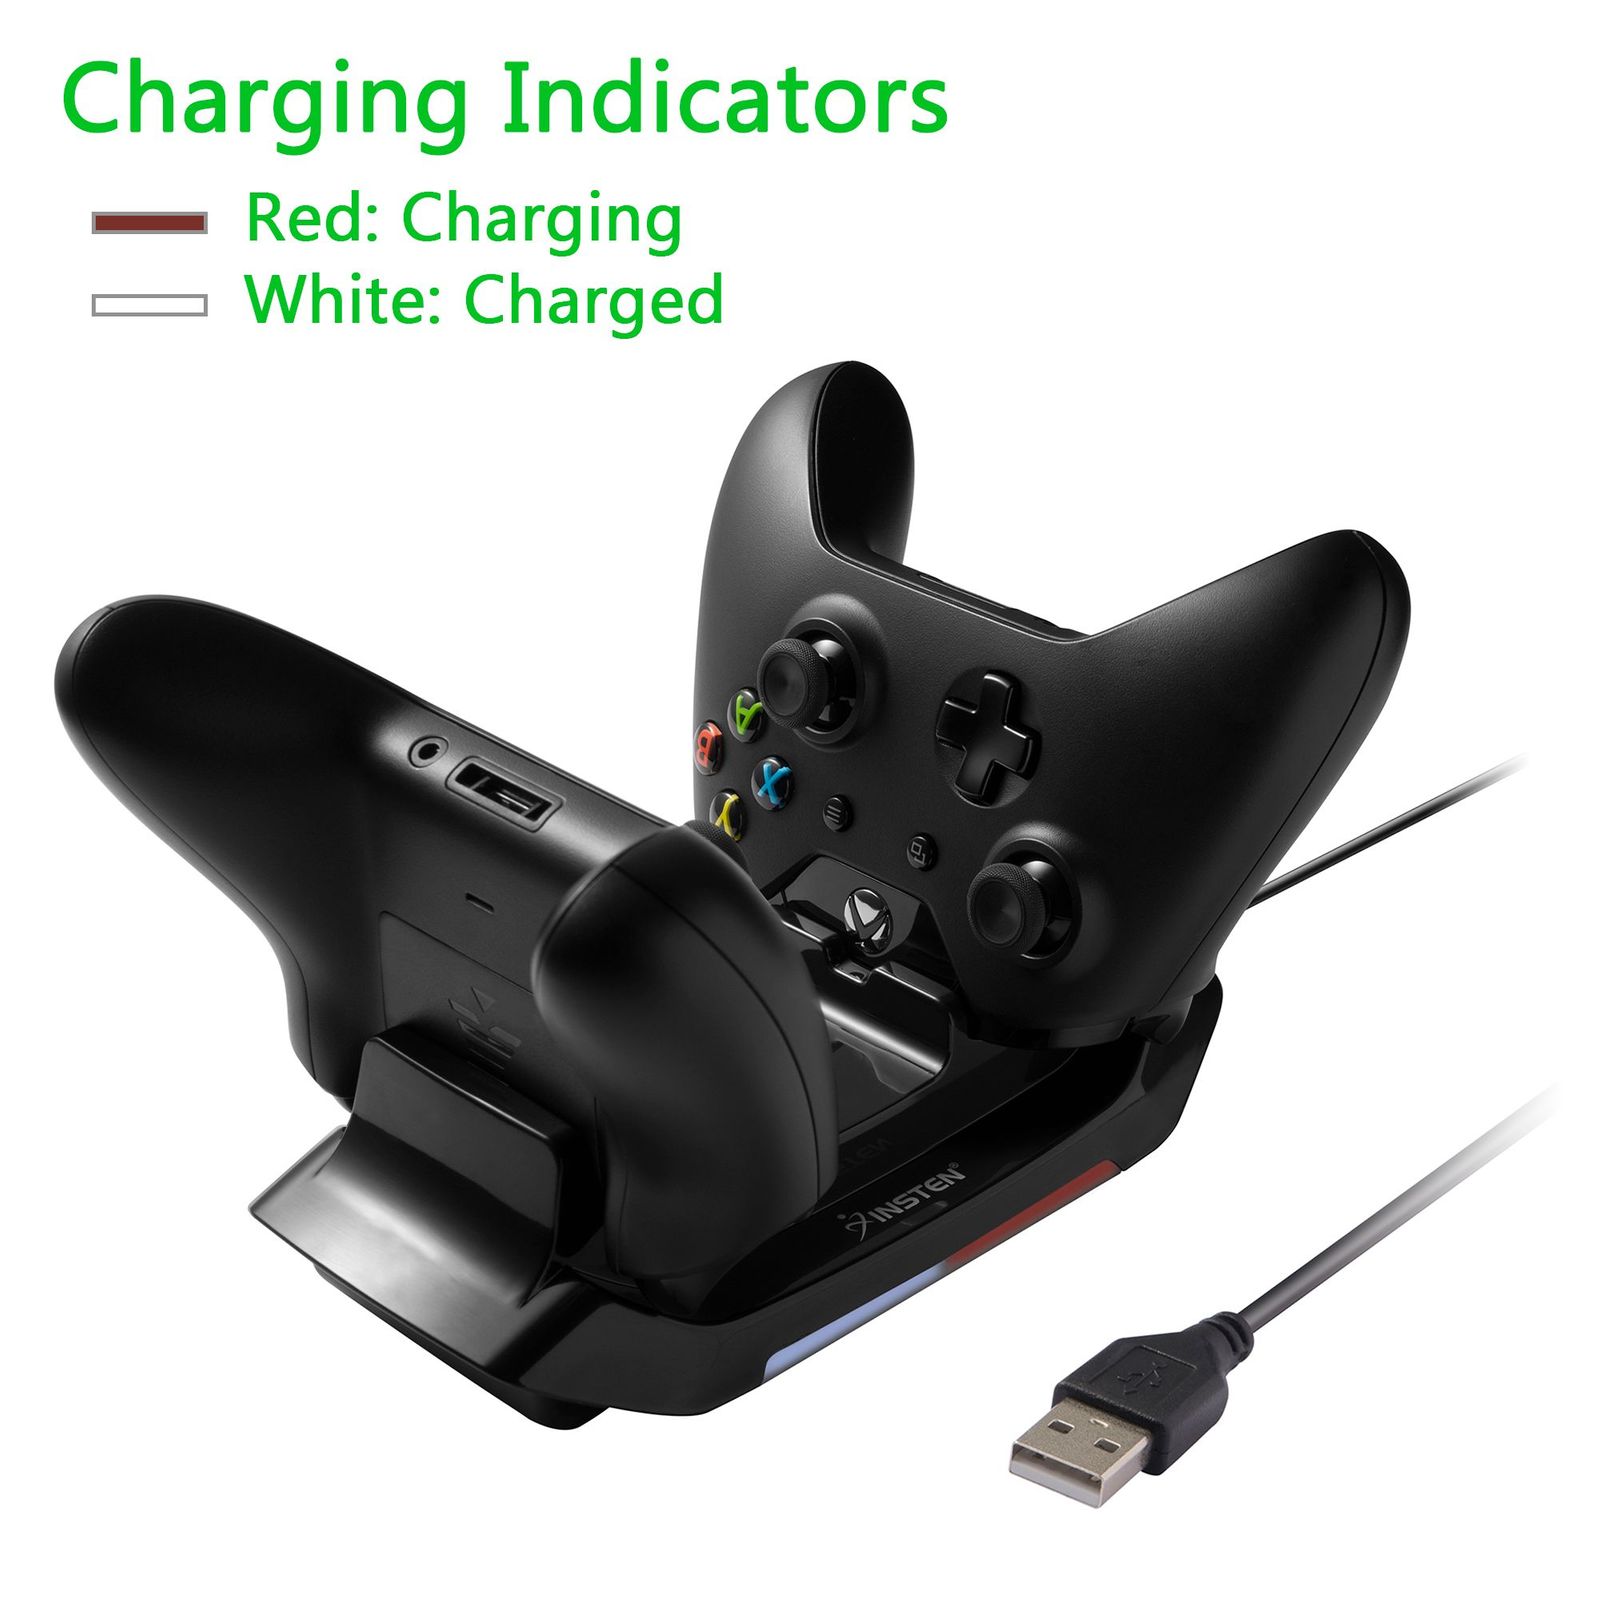 Insten Xbox One Controller Charging Station Stand with 2 Rechargeable Battery Pack Charger Dock and USB Cable for Xbox One / Xbox One S / One Elite / Xbox One X - image 3 of 10